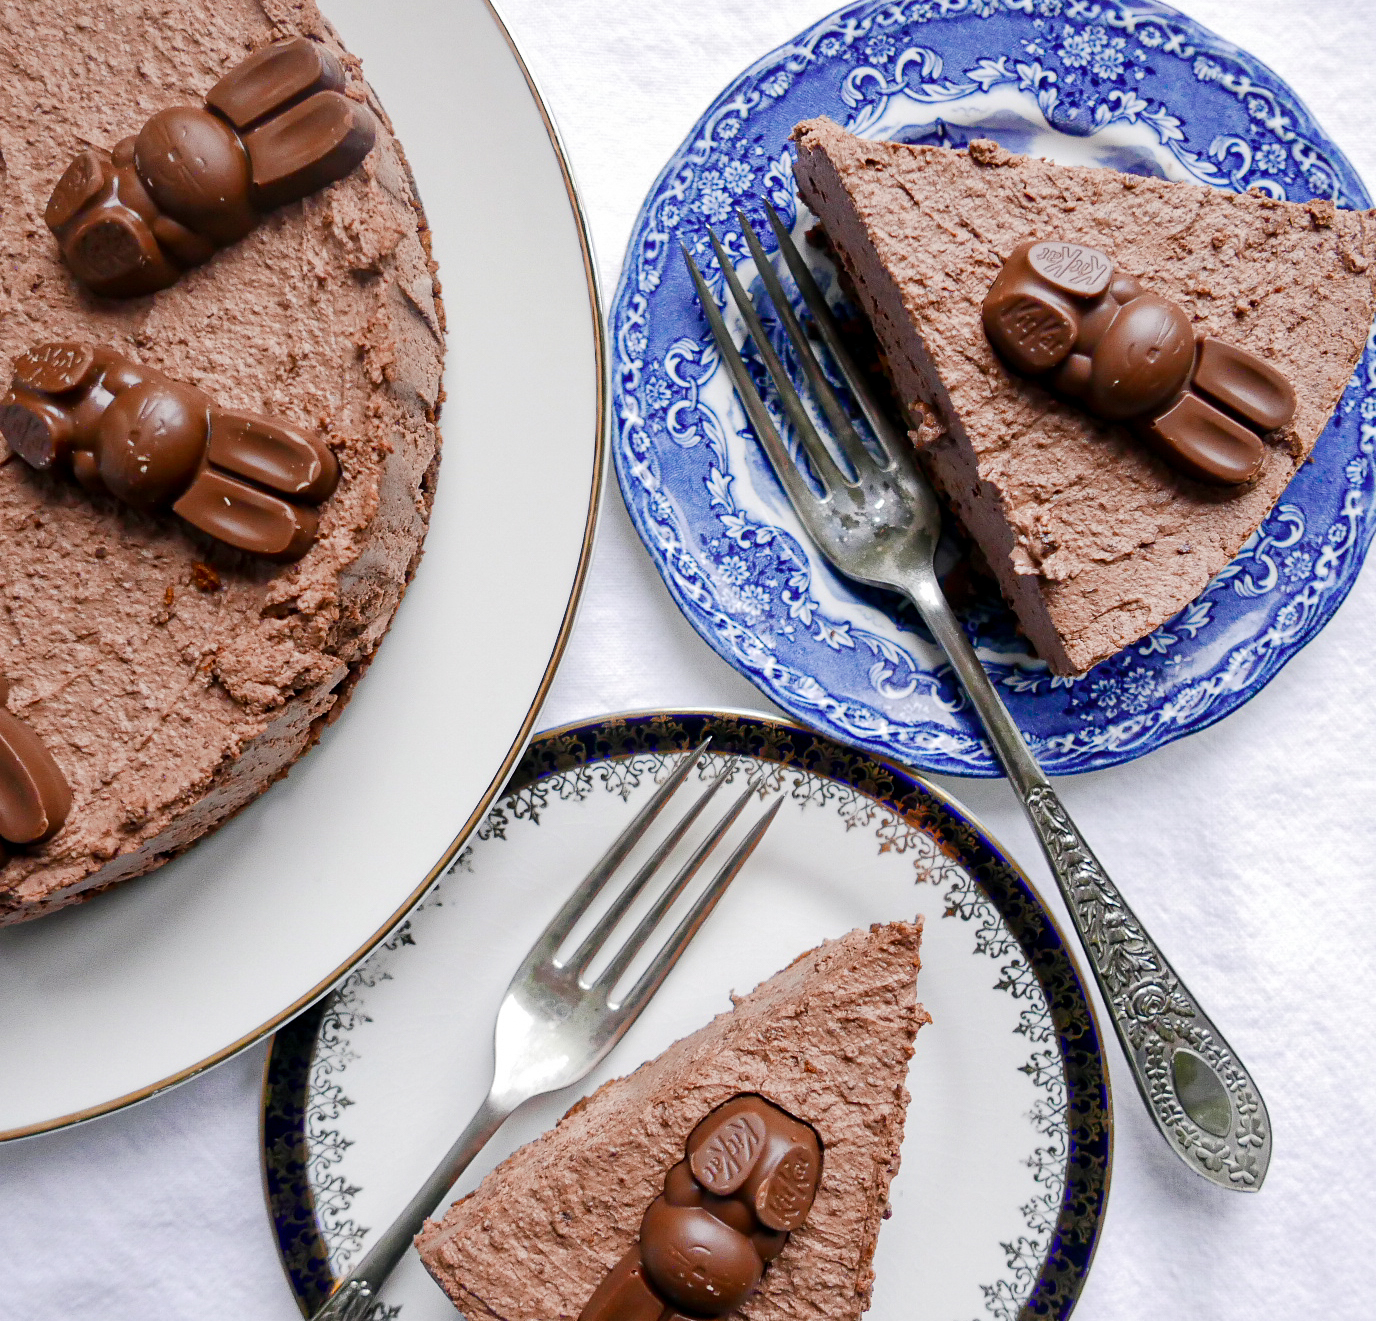 no bake chocolate cheesecake with KitKat bunnies - Cook Simply